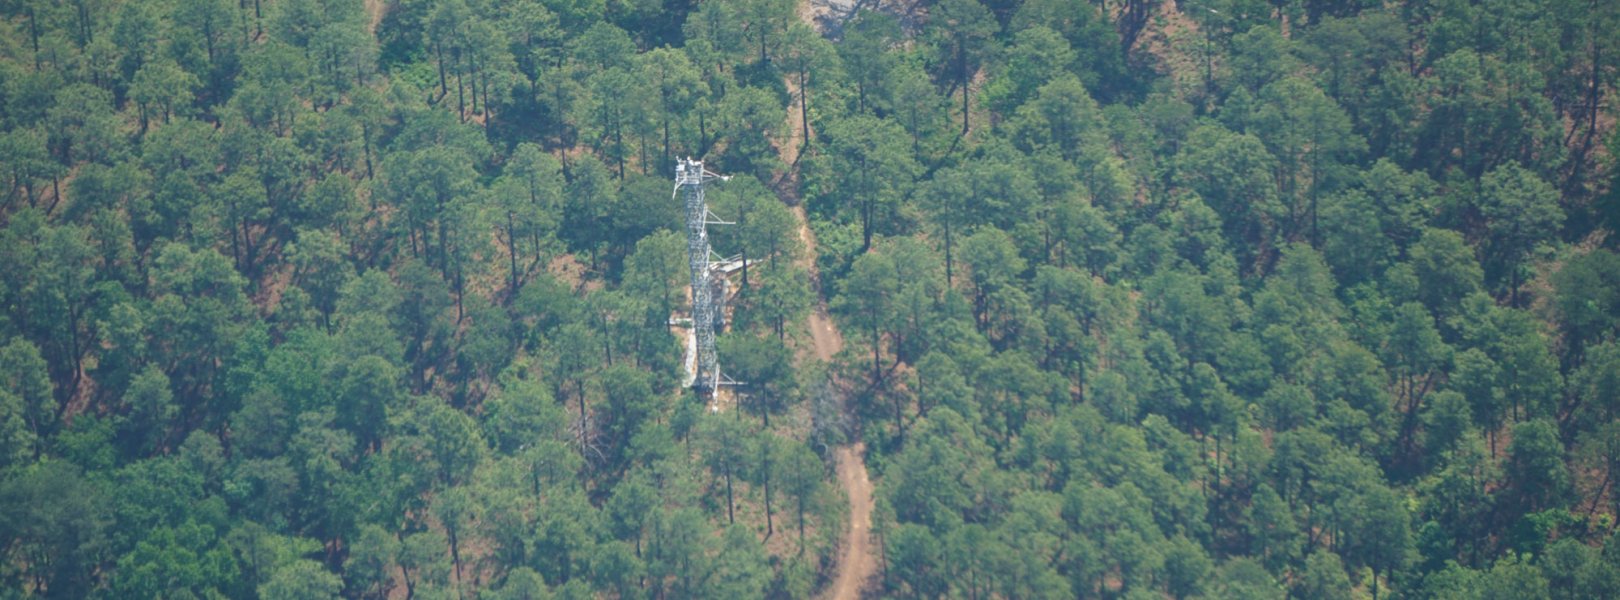 Overhead view of the TALL tower